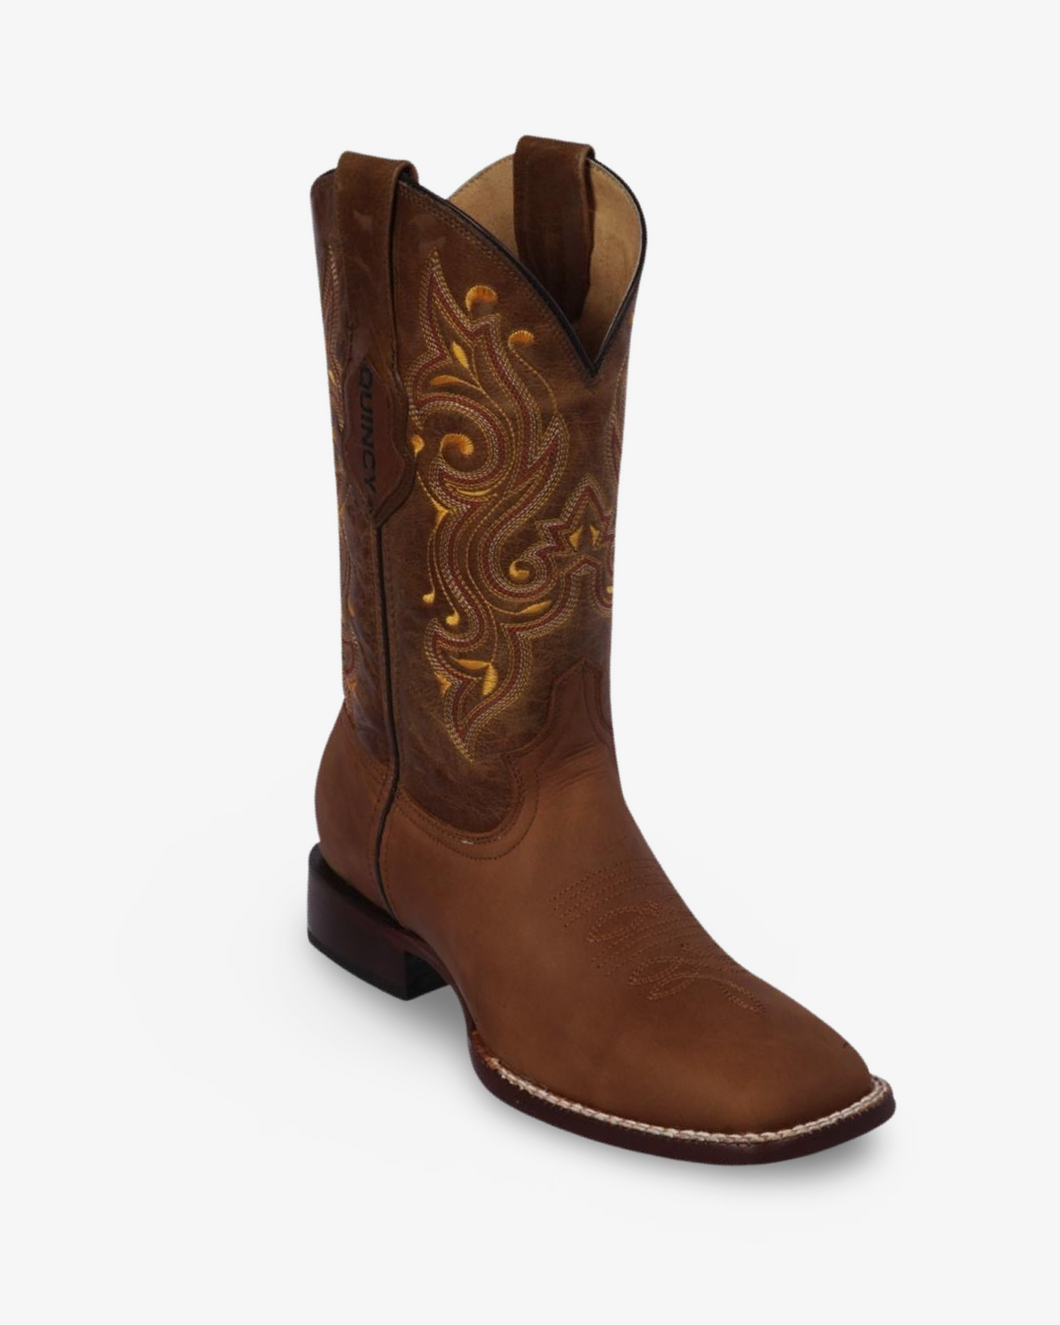 Quincy Boots Dark Brown Leather Wide Square Toe Cowboy Boot